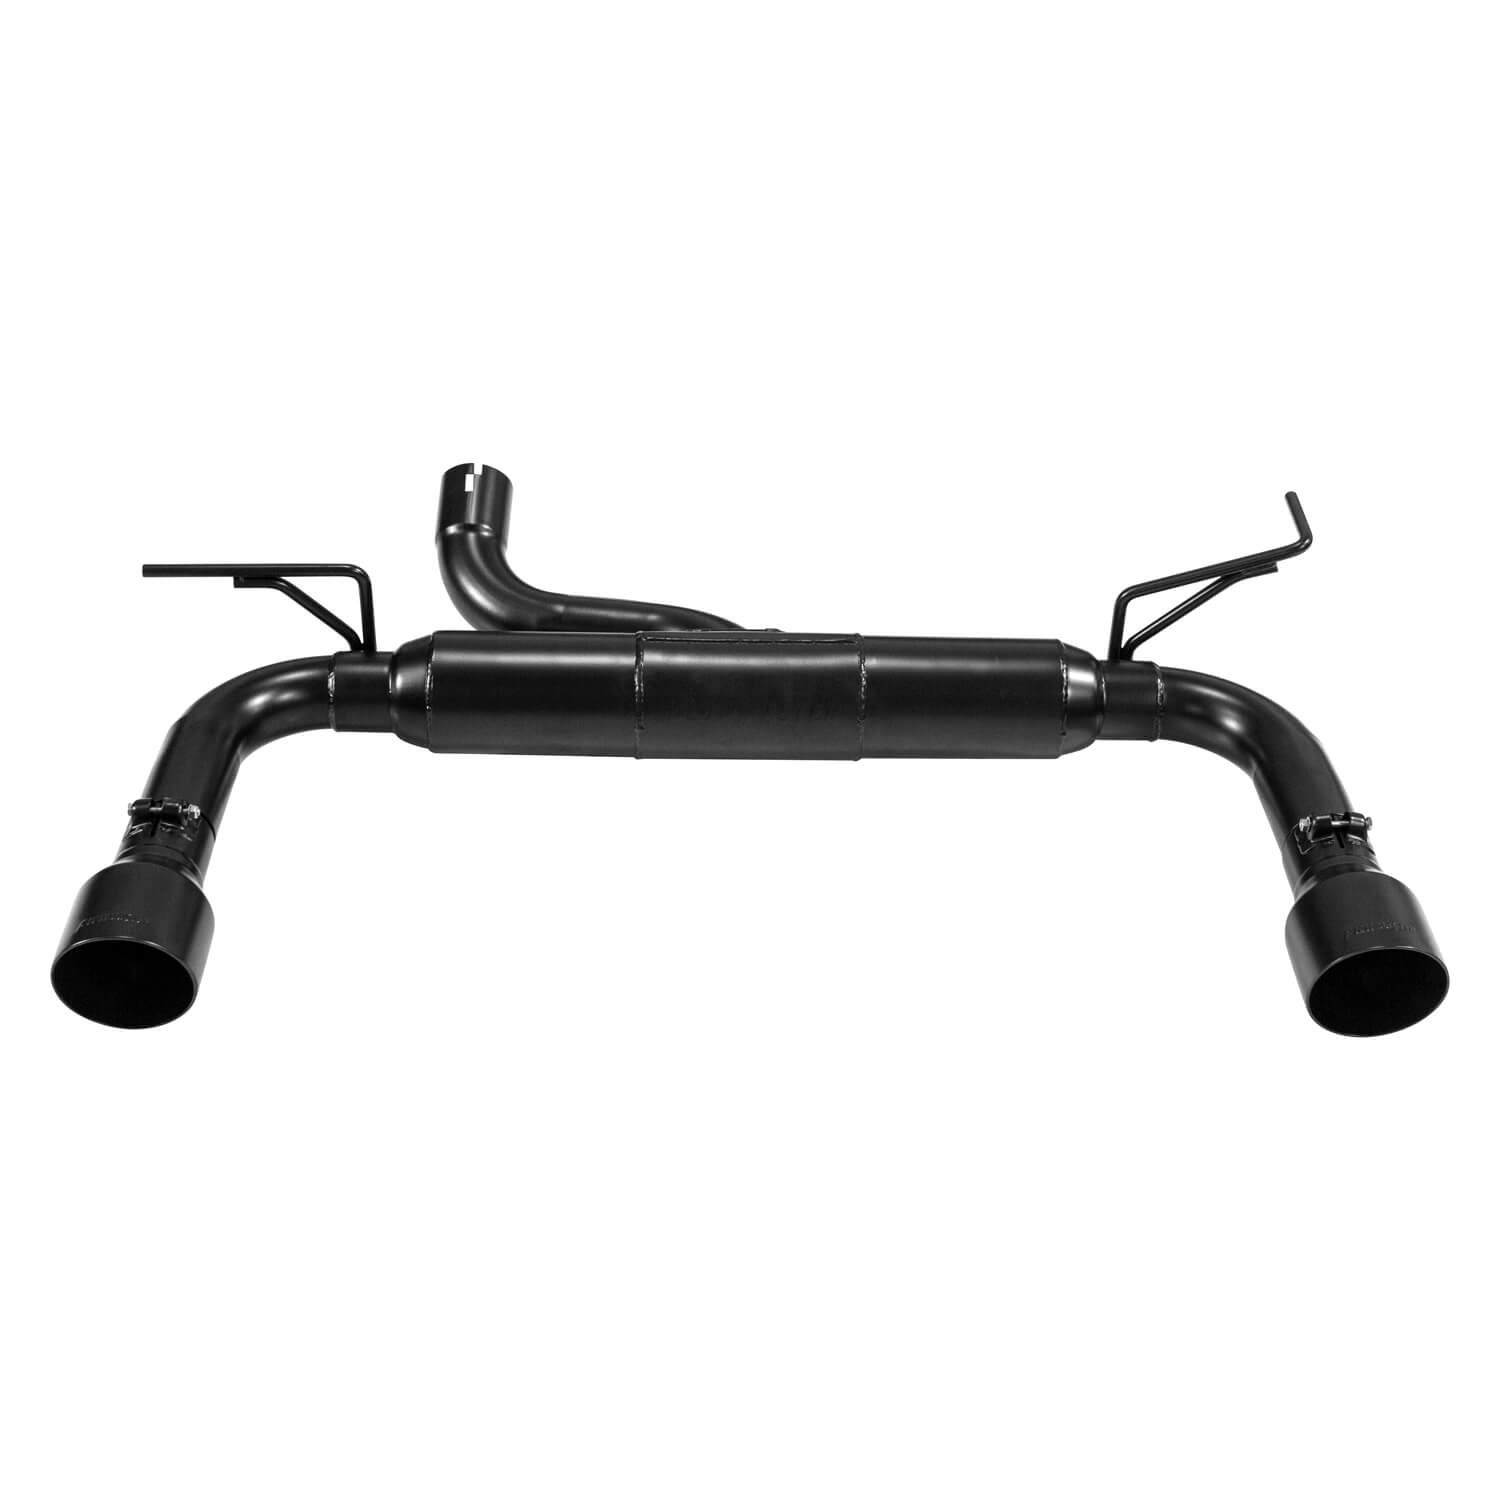 Flowmaster Outlaw Axle-Back Exhaust System with Black Ceramic Stainless  Steel Tips - JK/JKU | Best Prices & Reviews at Morris 4x4